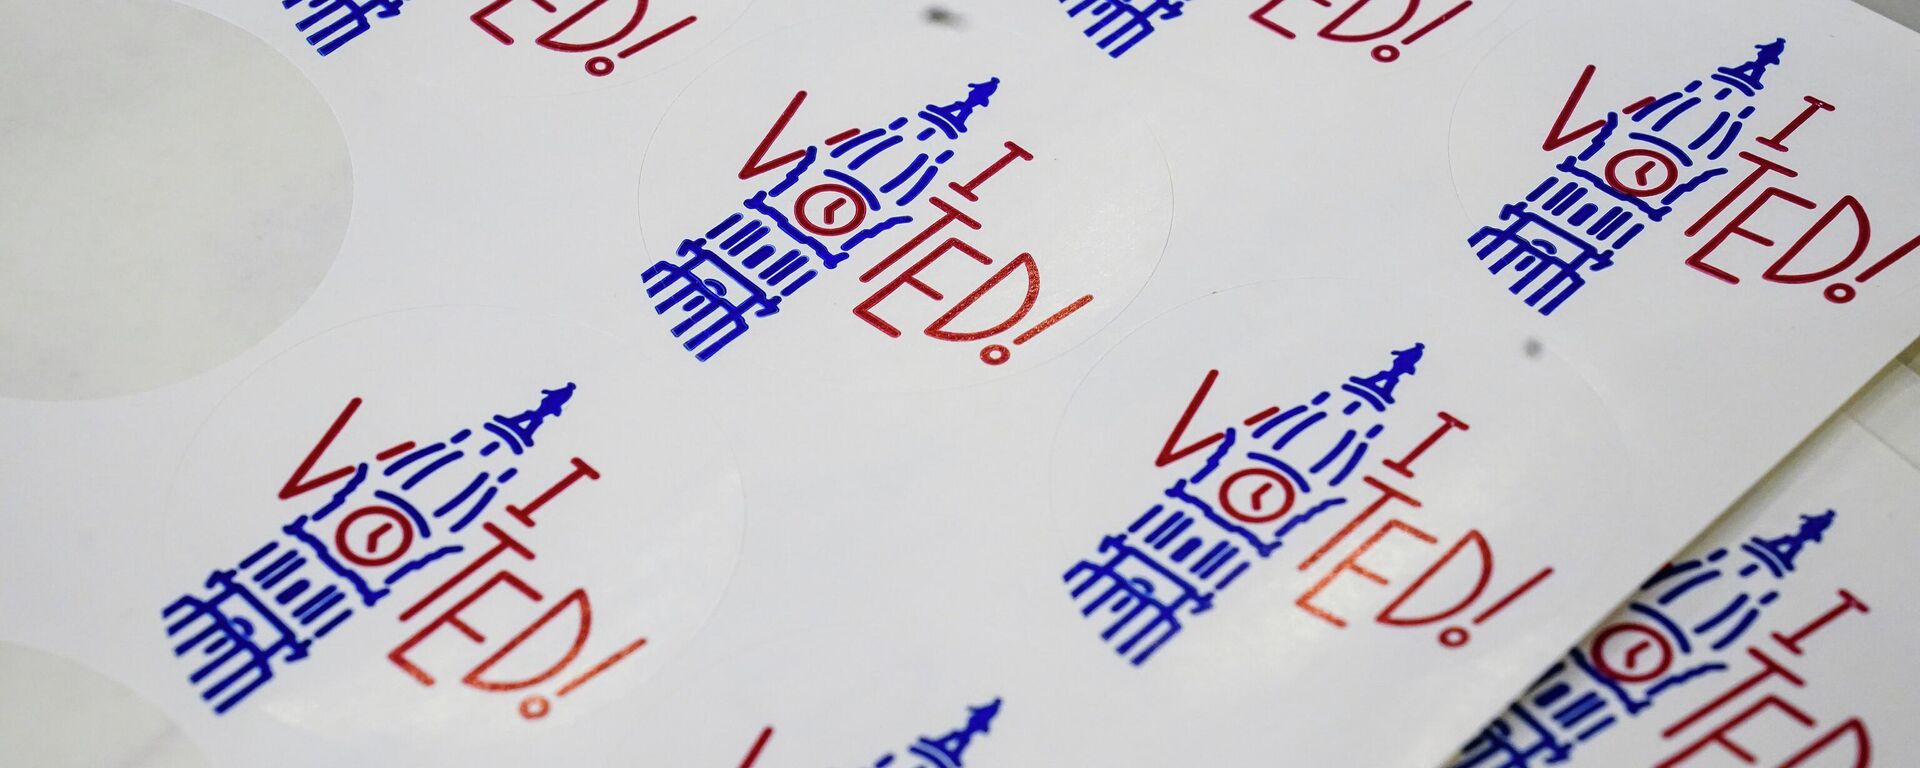 Stickers for voters in the midterm elections are set out at a polling place located at the Museum of the American Revolution in Philadelphia, Tuesday, Nov. 8, 2022.  - Sputnik International, 1920, 04.07.2023